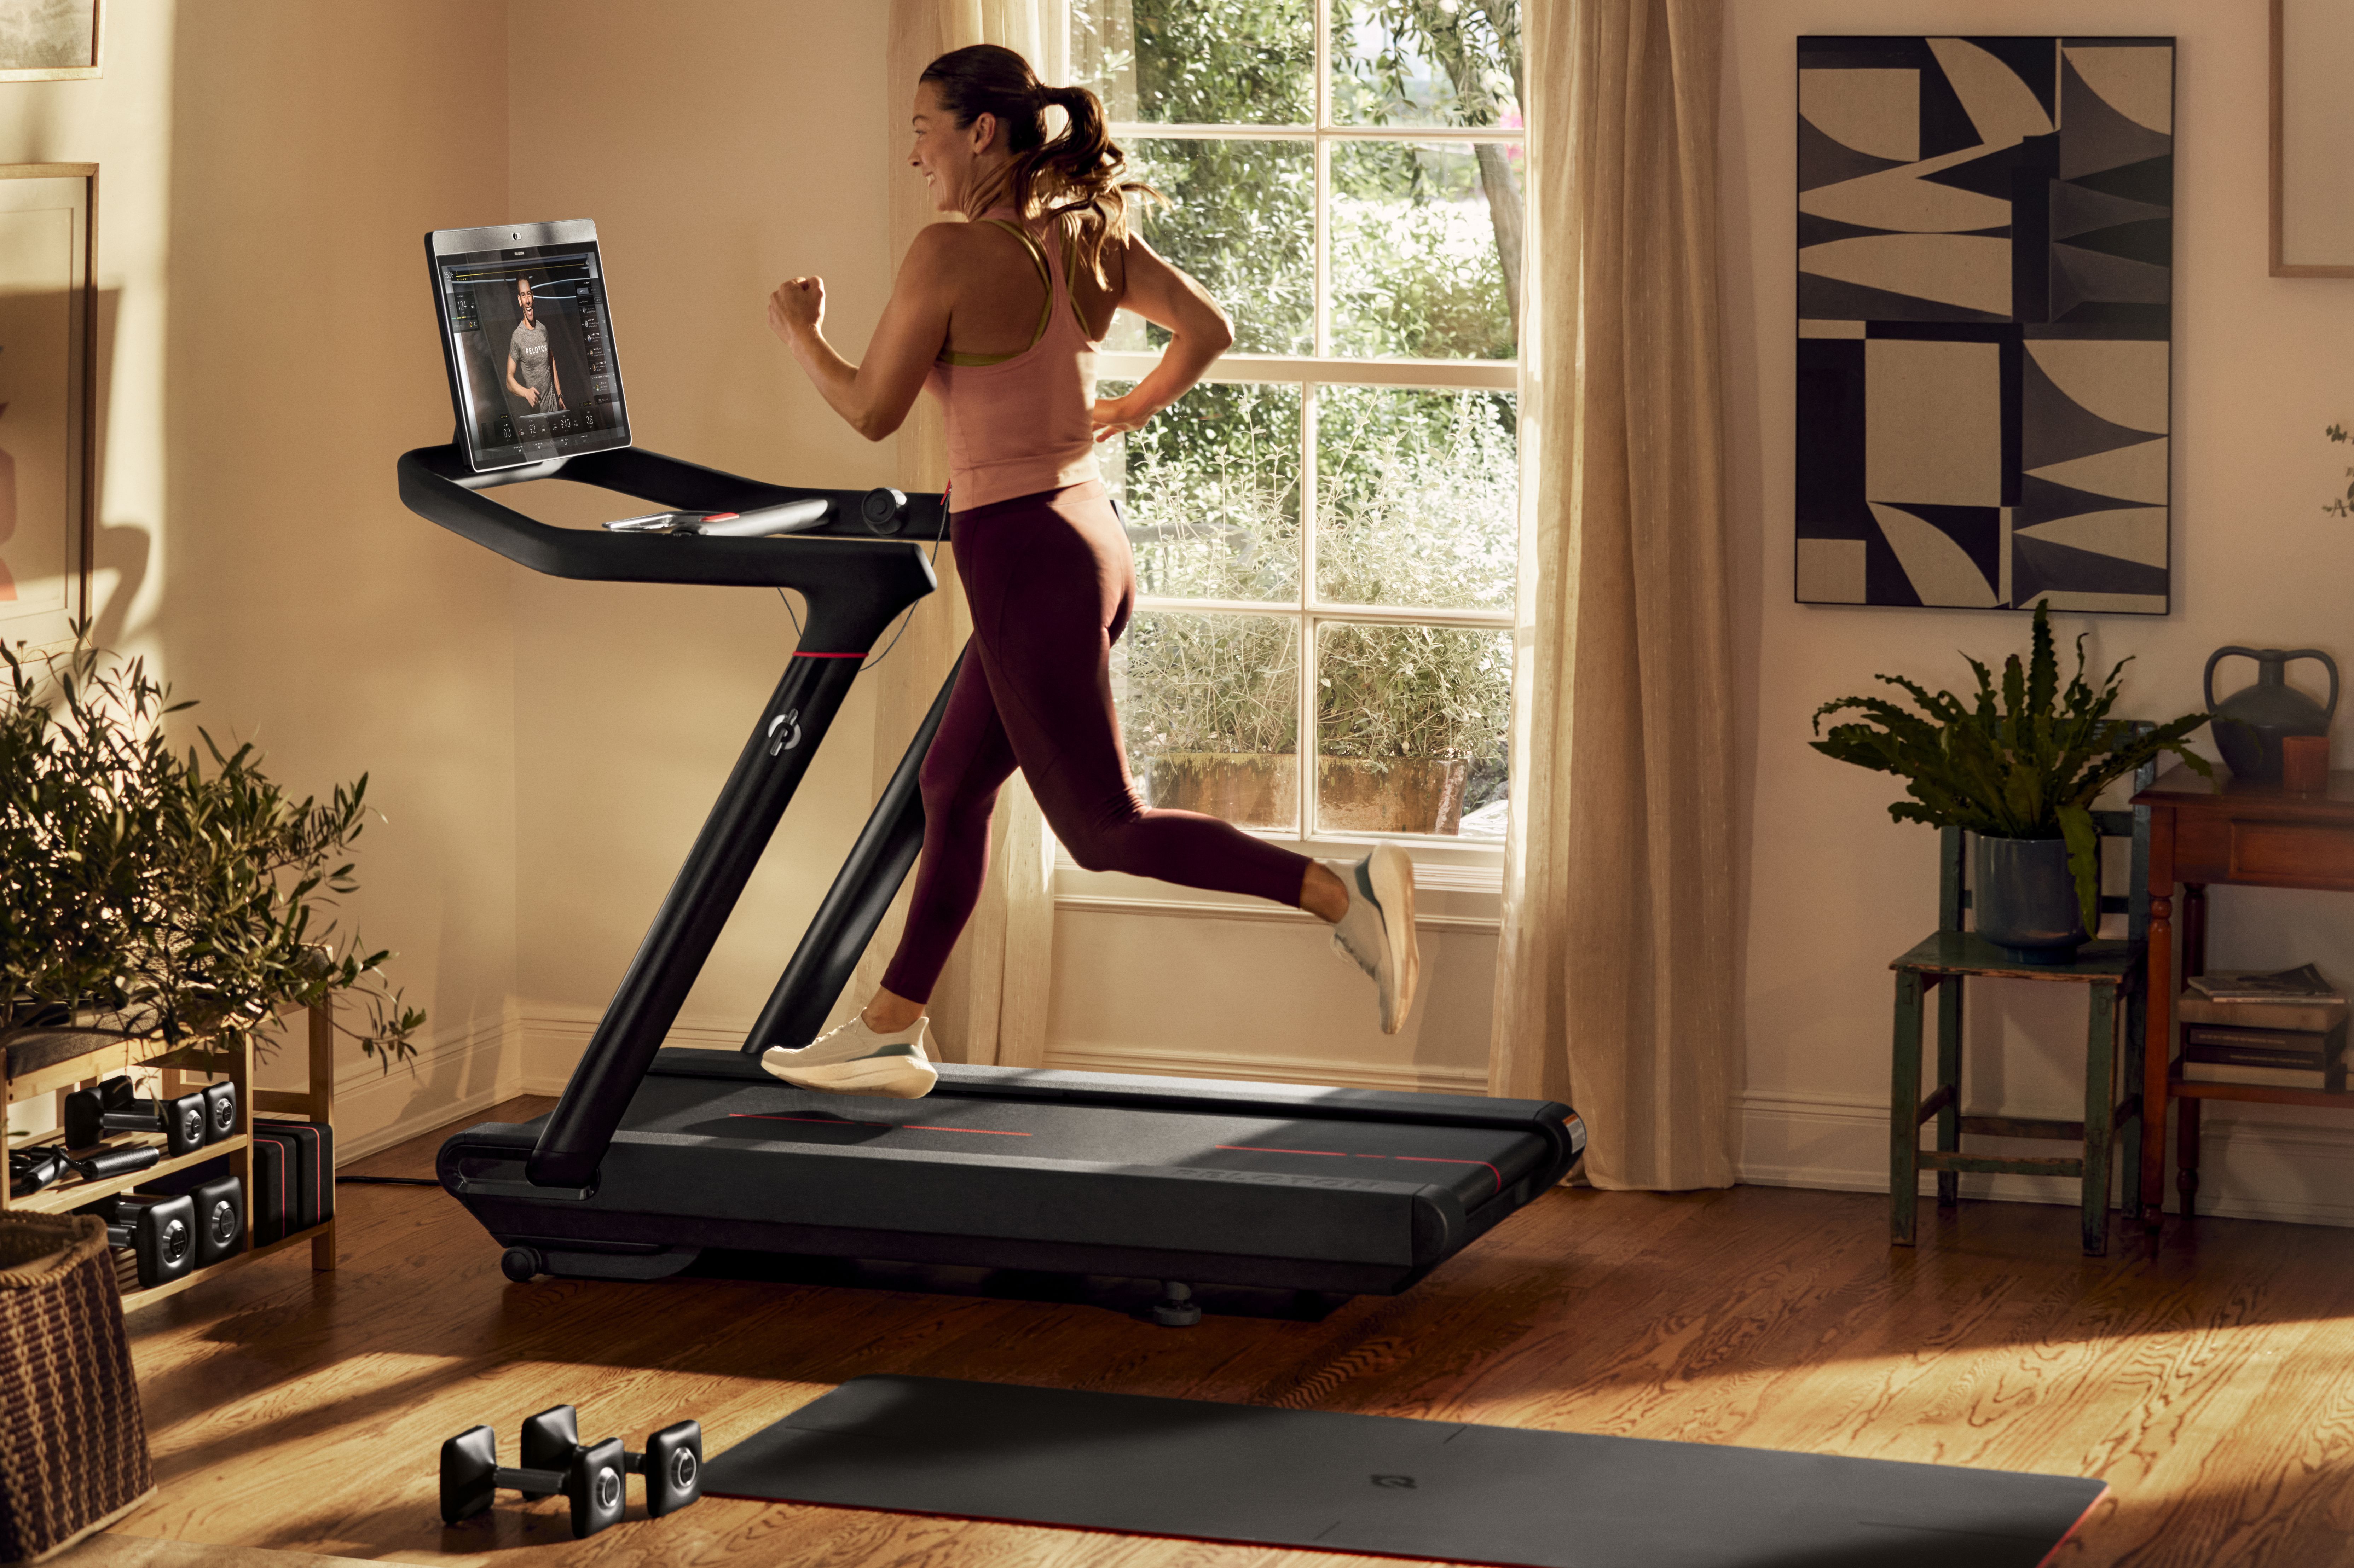 7 Hotels with Peloton Equipment to Keep Your Routine Up While You Travel